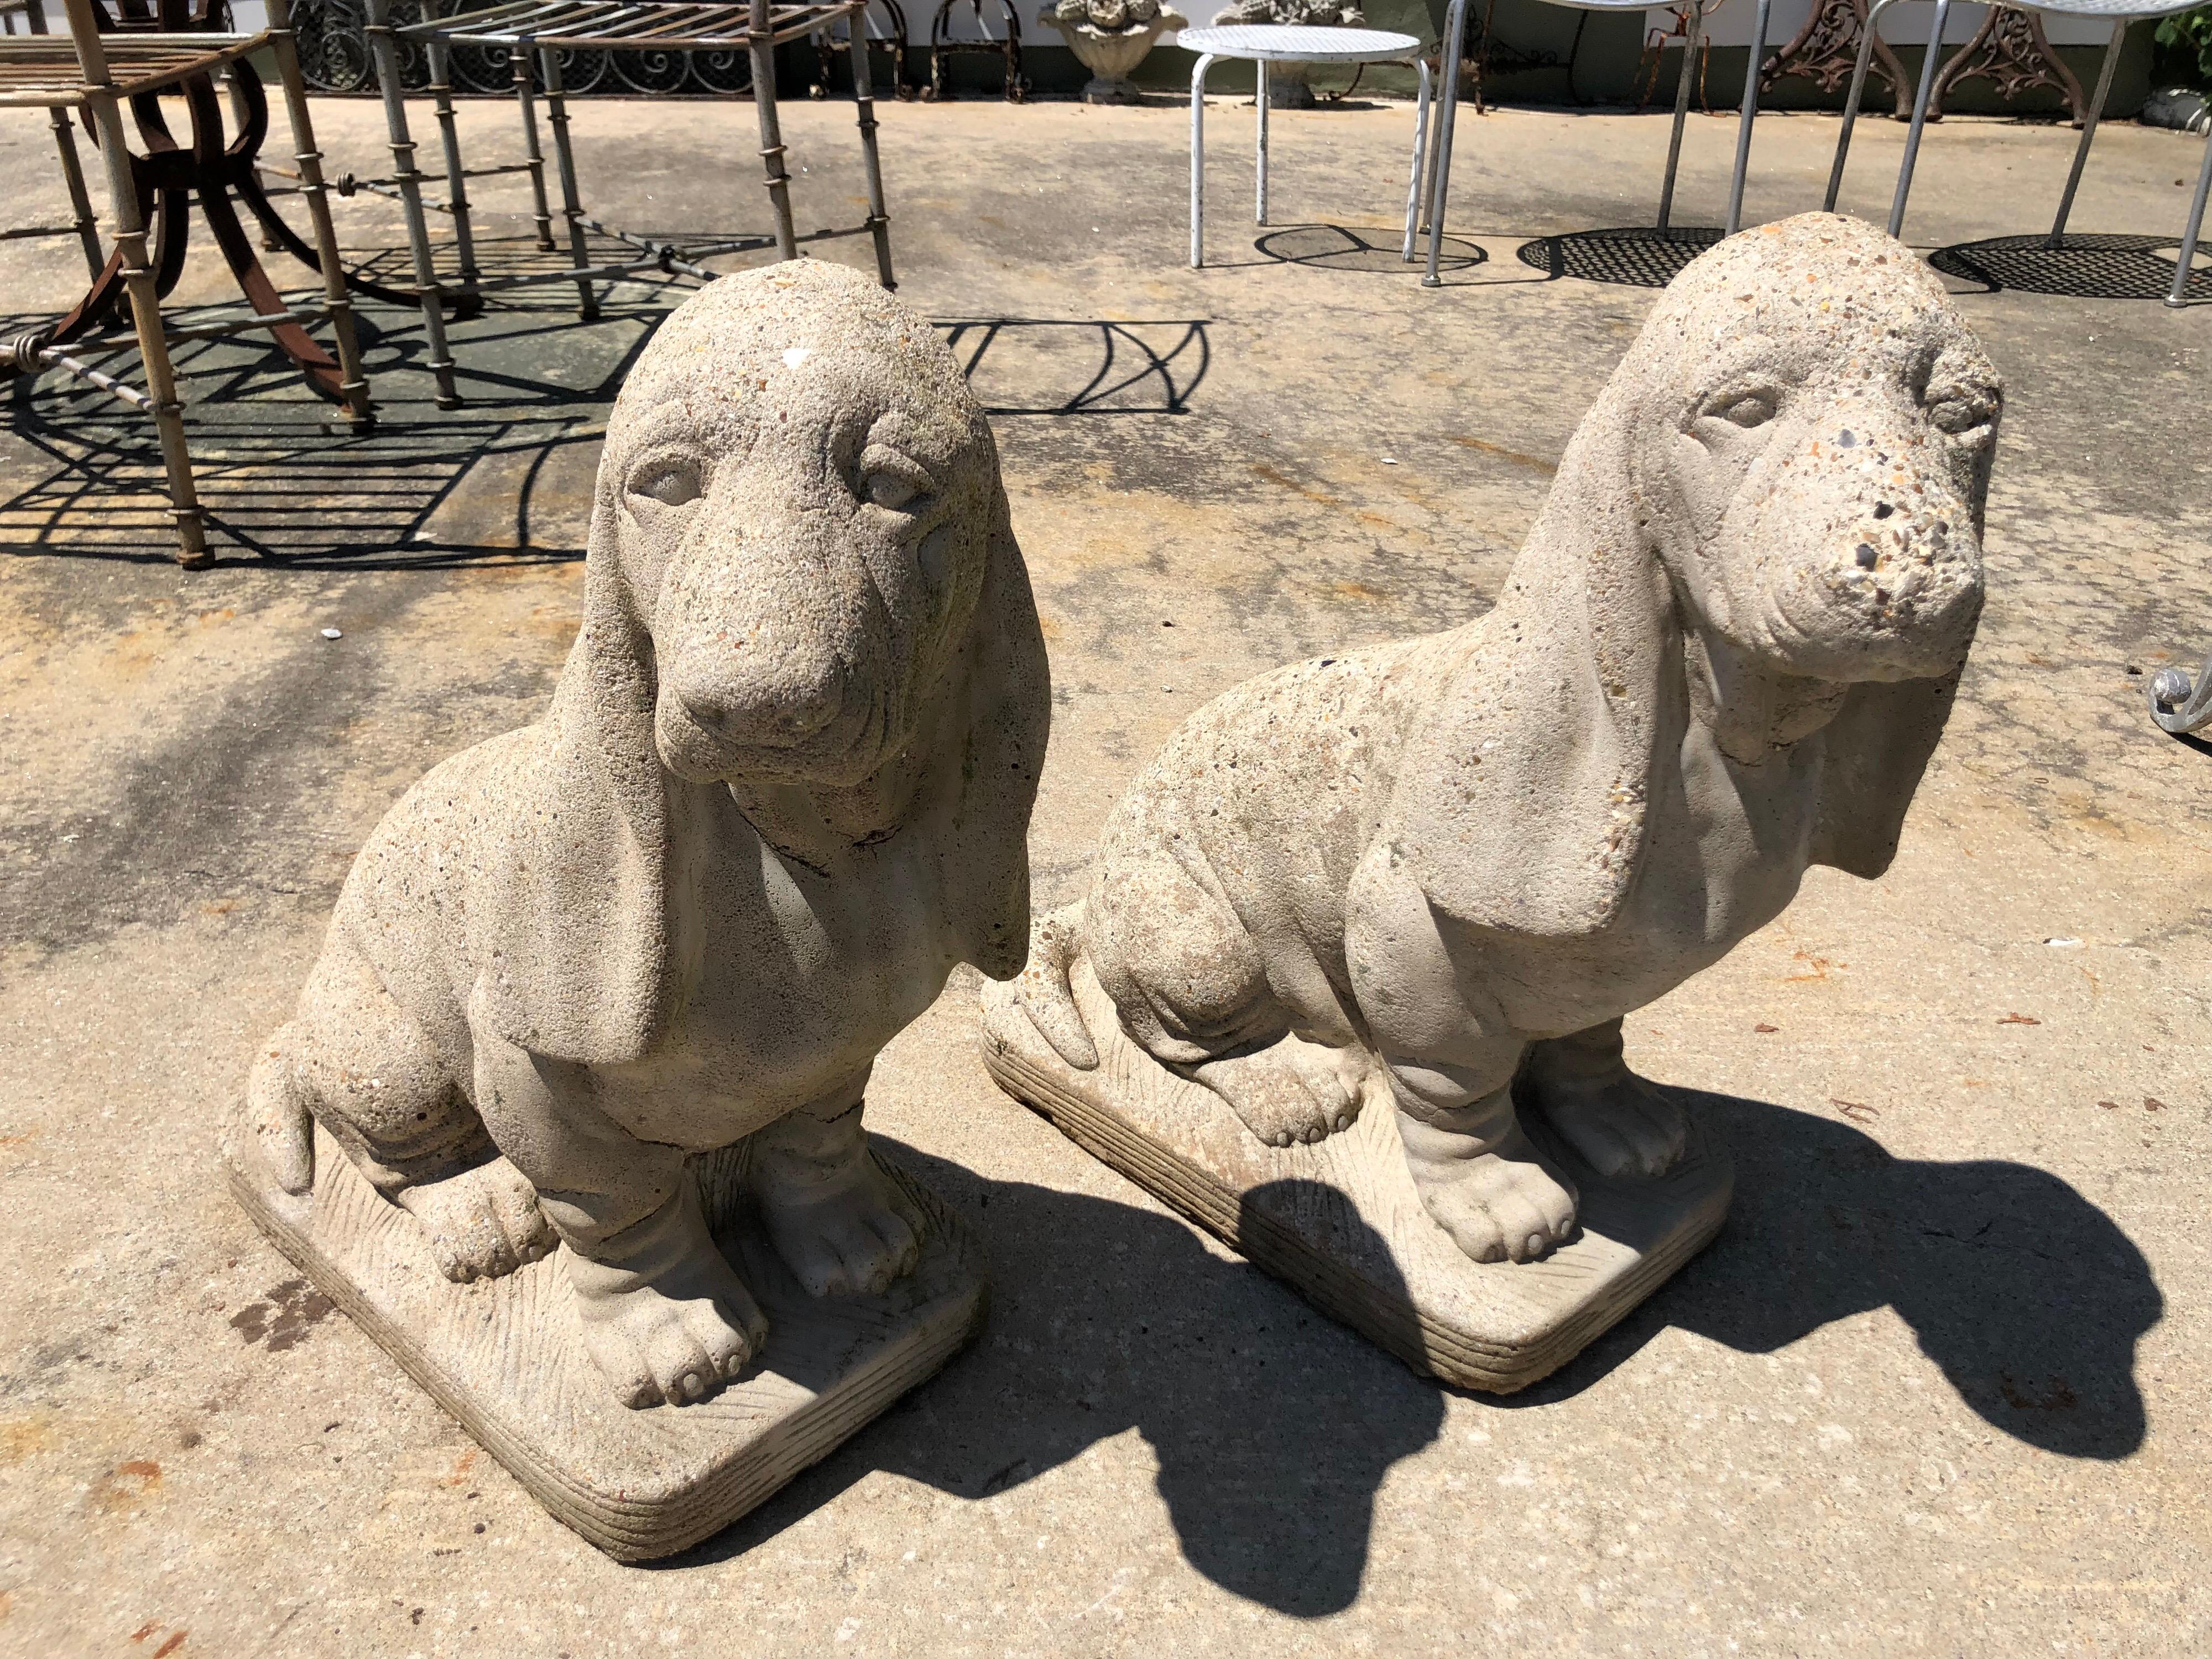 Pair of vintage cement Bassett hound garden sculptures. Perfect accent pieces for your garden or patio decor. One dogs face is worn from the elements. Some cast seams present, not breaks in cement. If you are a dog lover than these are for you. Very